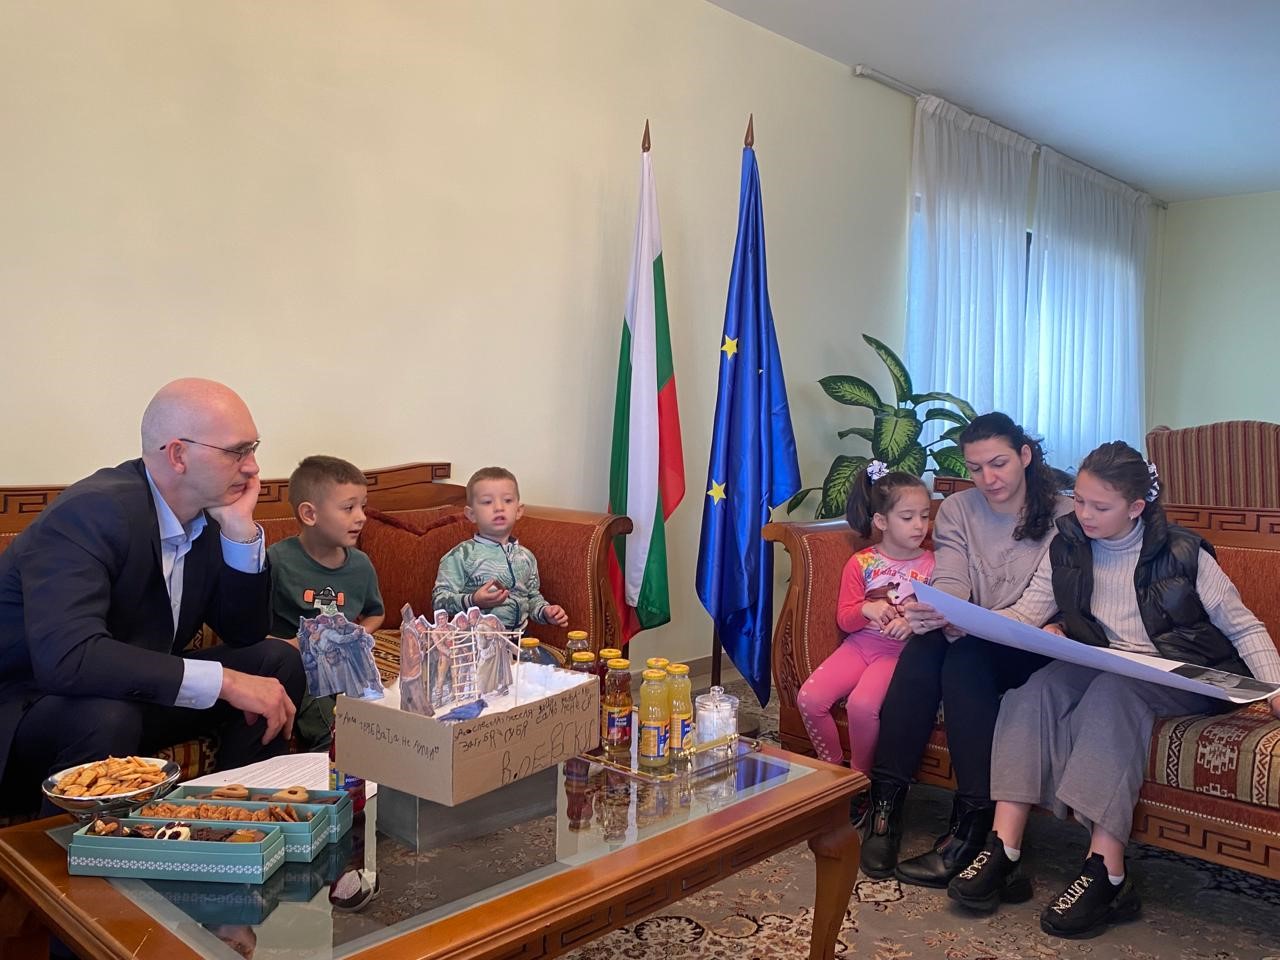 In the premises of the Bulgarian Embassy in Beirut the students of the Bulgarian Sunday Scholl “Ivan Vazov” and their teacher, Ms Elena Dyulgerova, performed an “Hour for the Apostle!”